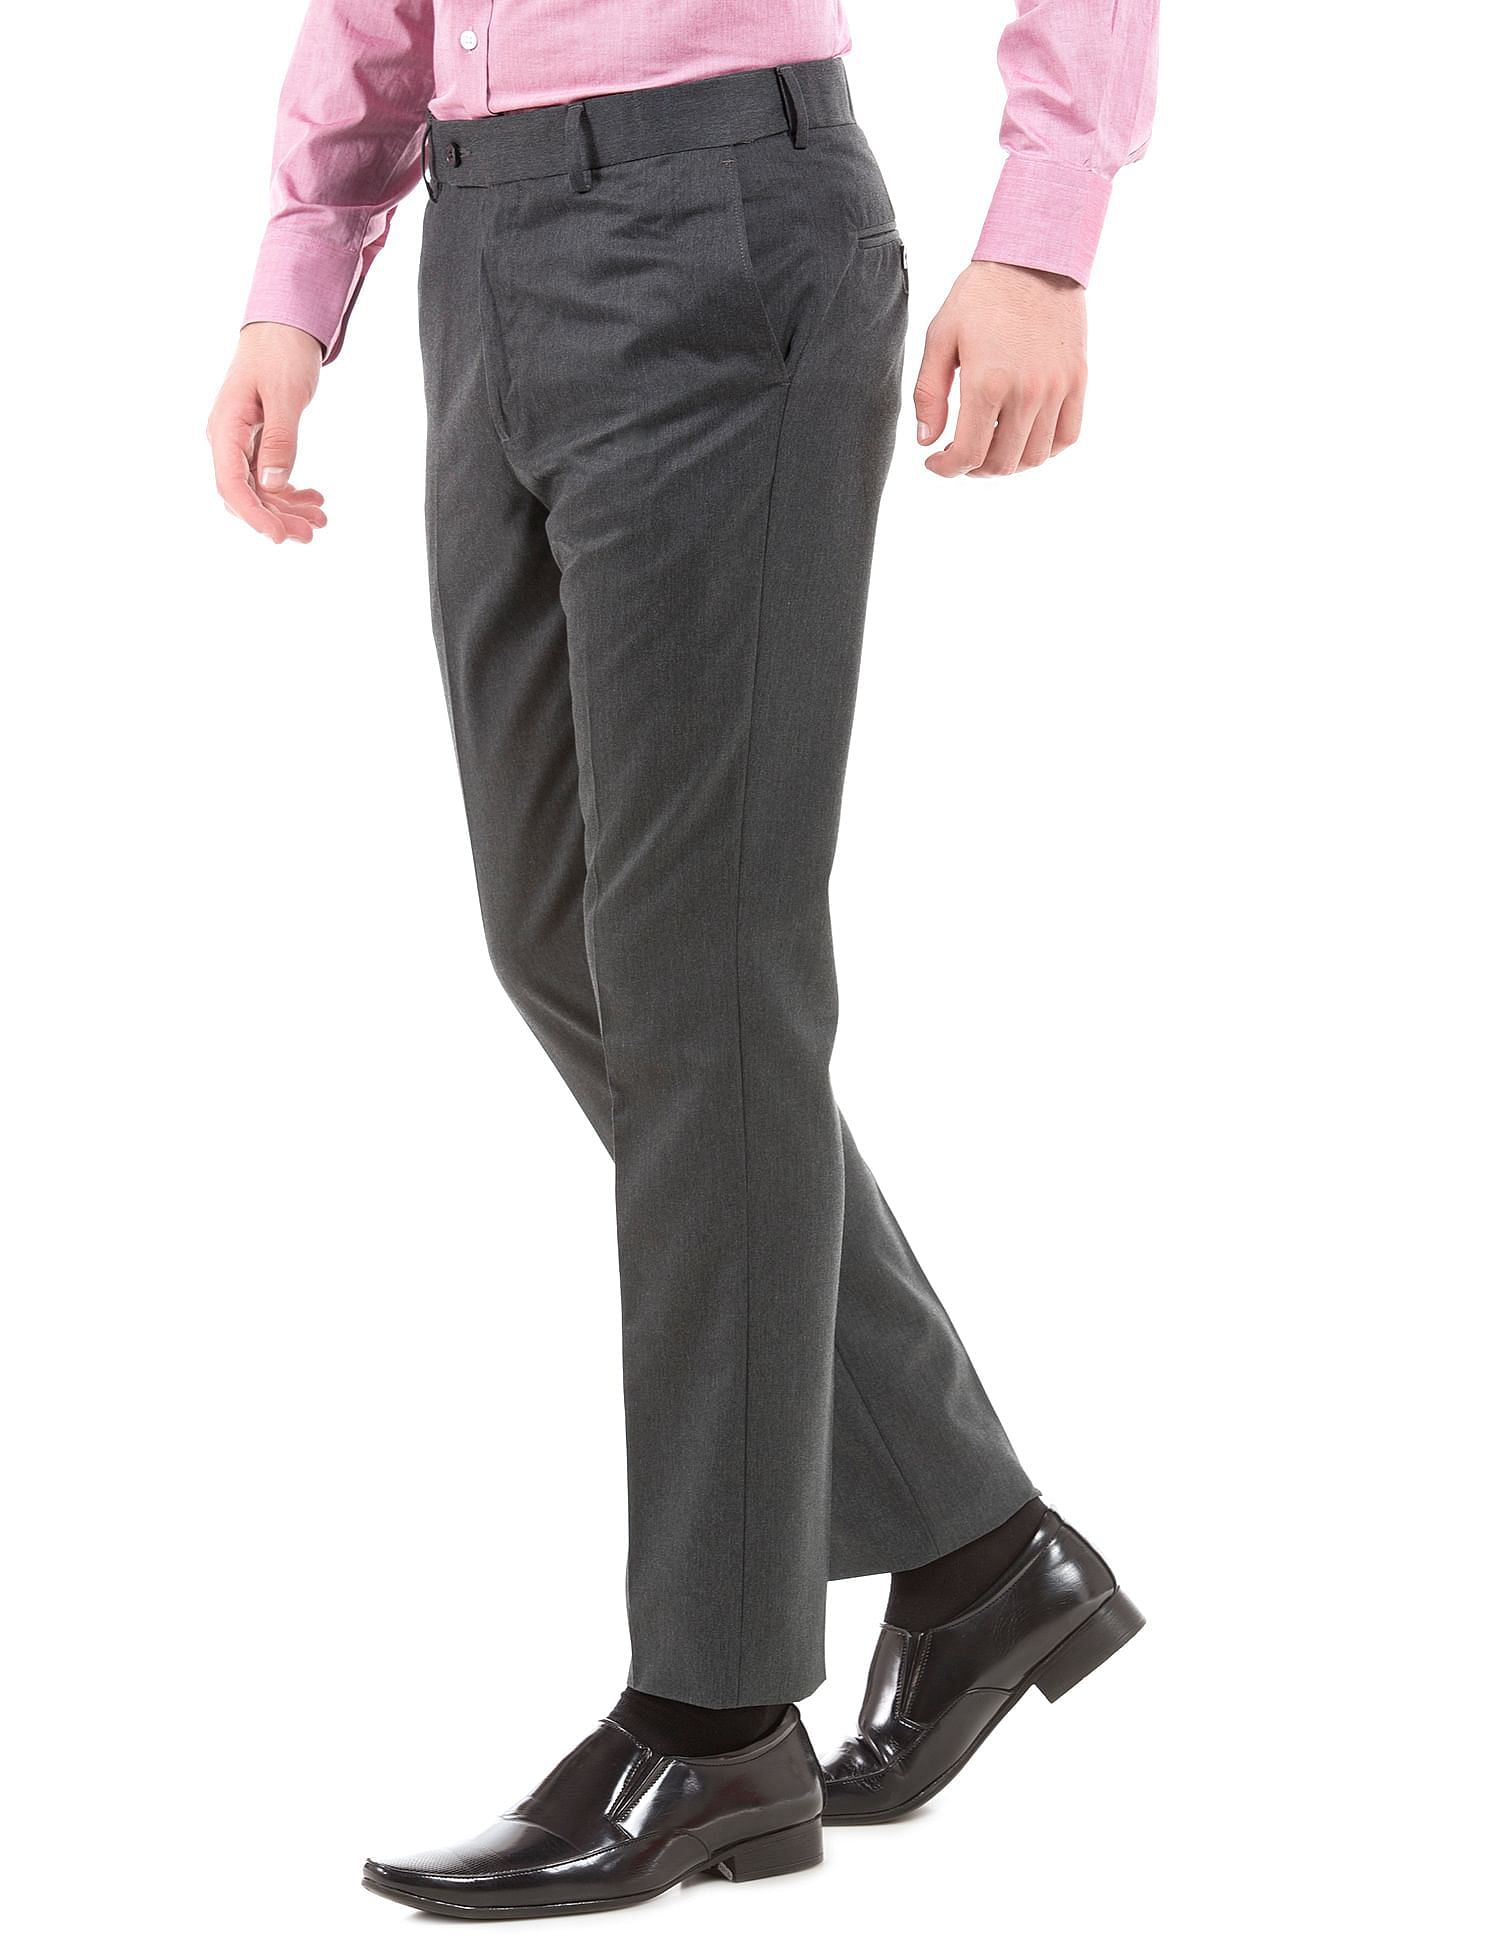 Arrow Mens Tapered Fit Trousers in Bangalore  Dealers Manufacturers   Suppliers  Justdial